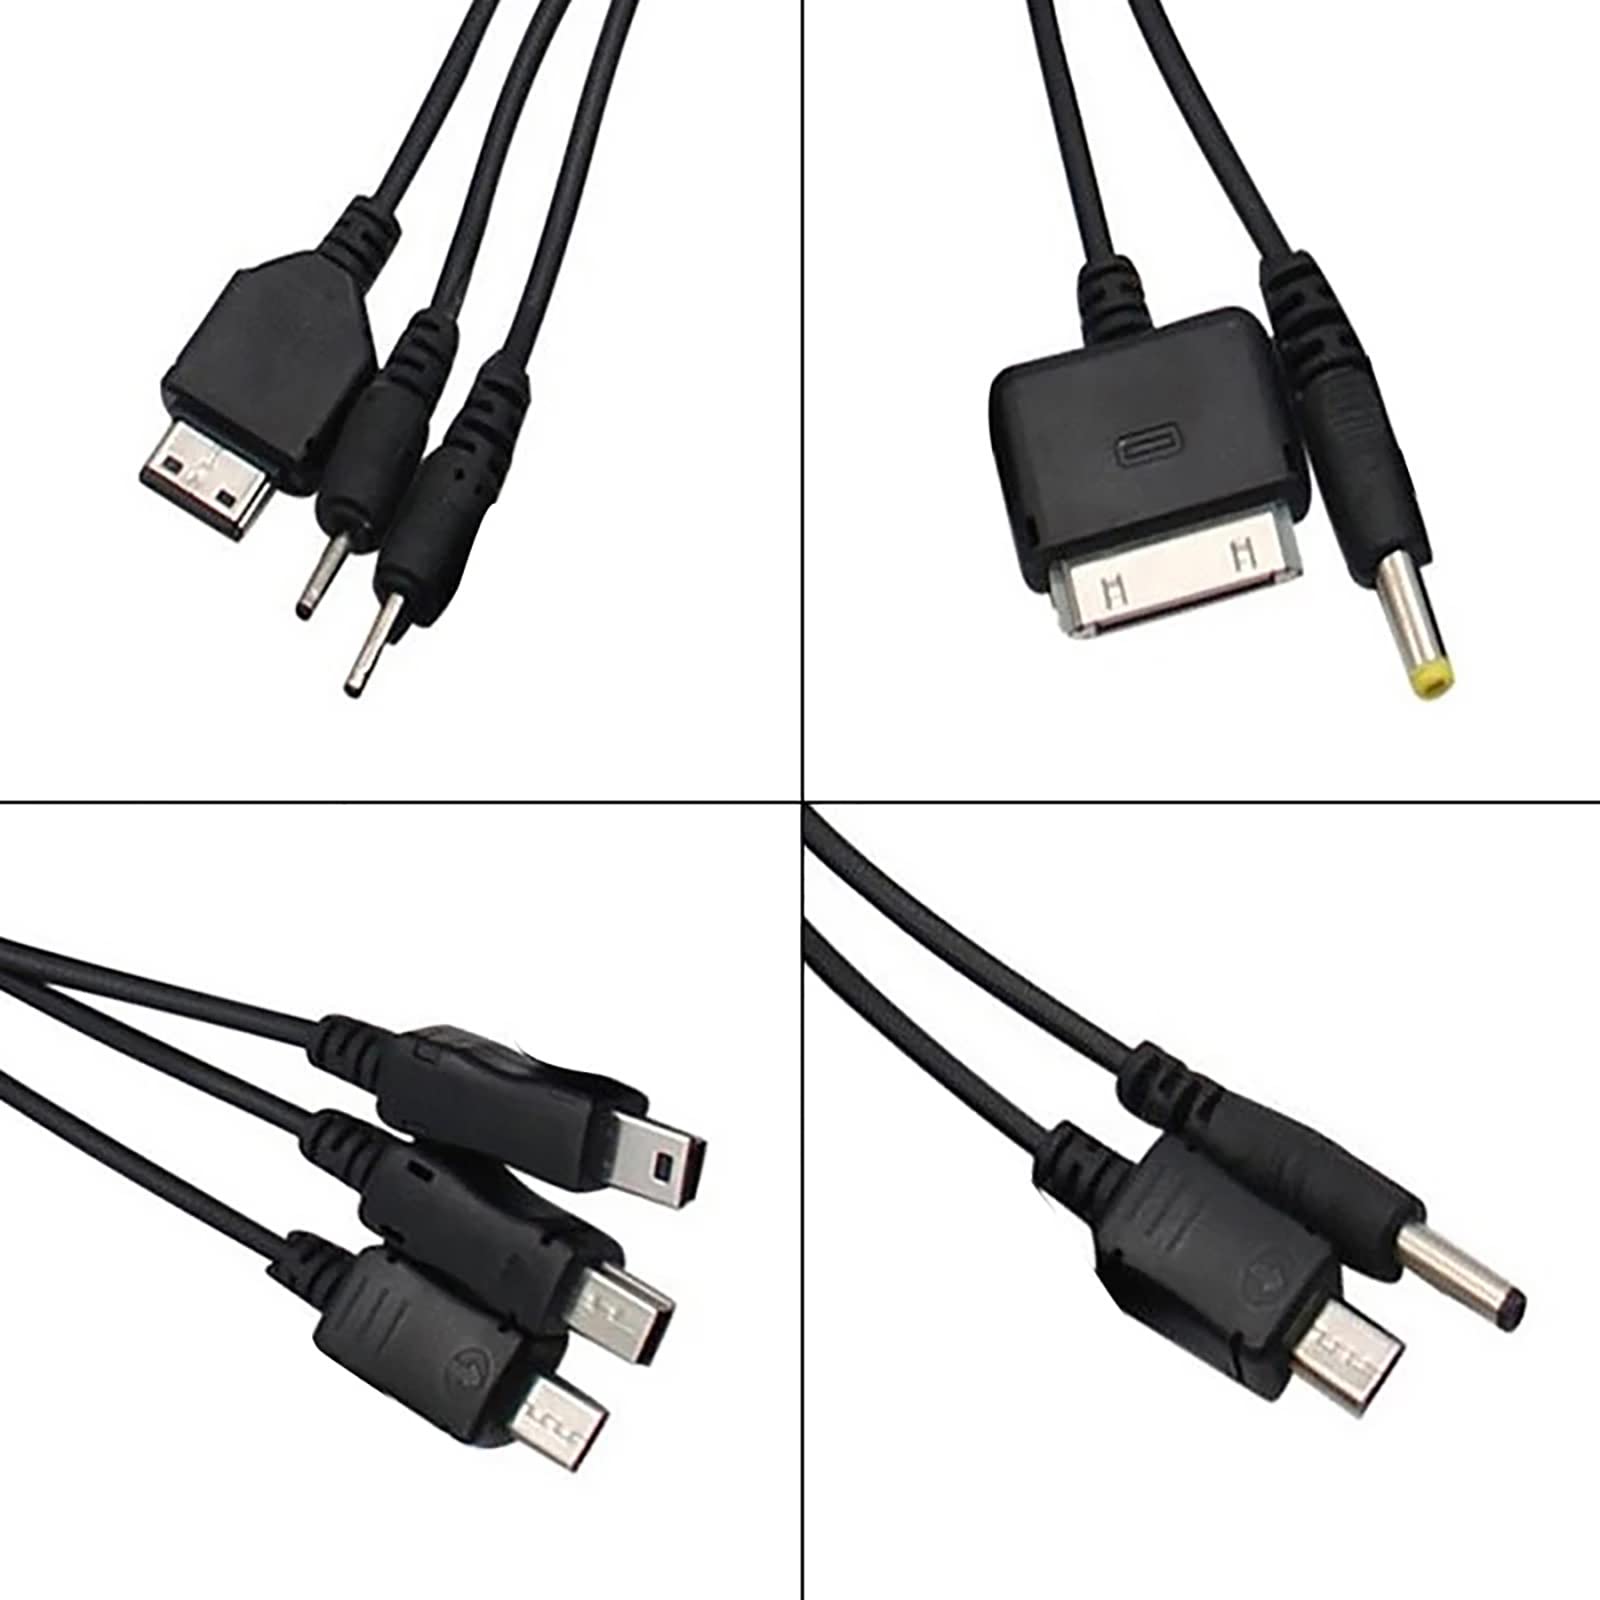 Diarypiece Universal 10 in 1 USB Cable Charger Adapter Cable, 20cm Data Cable Wire Cord